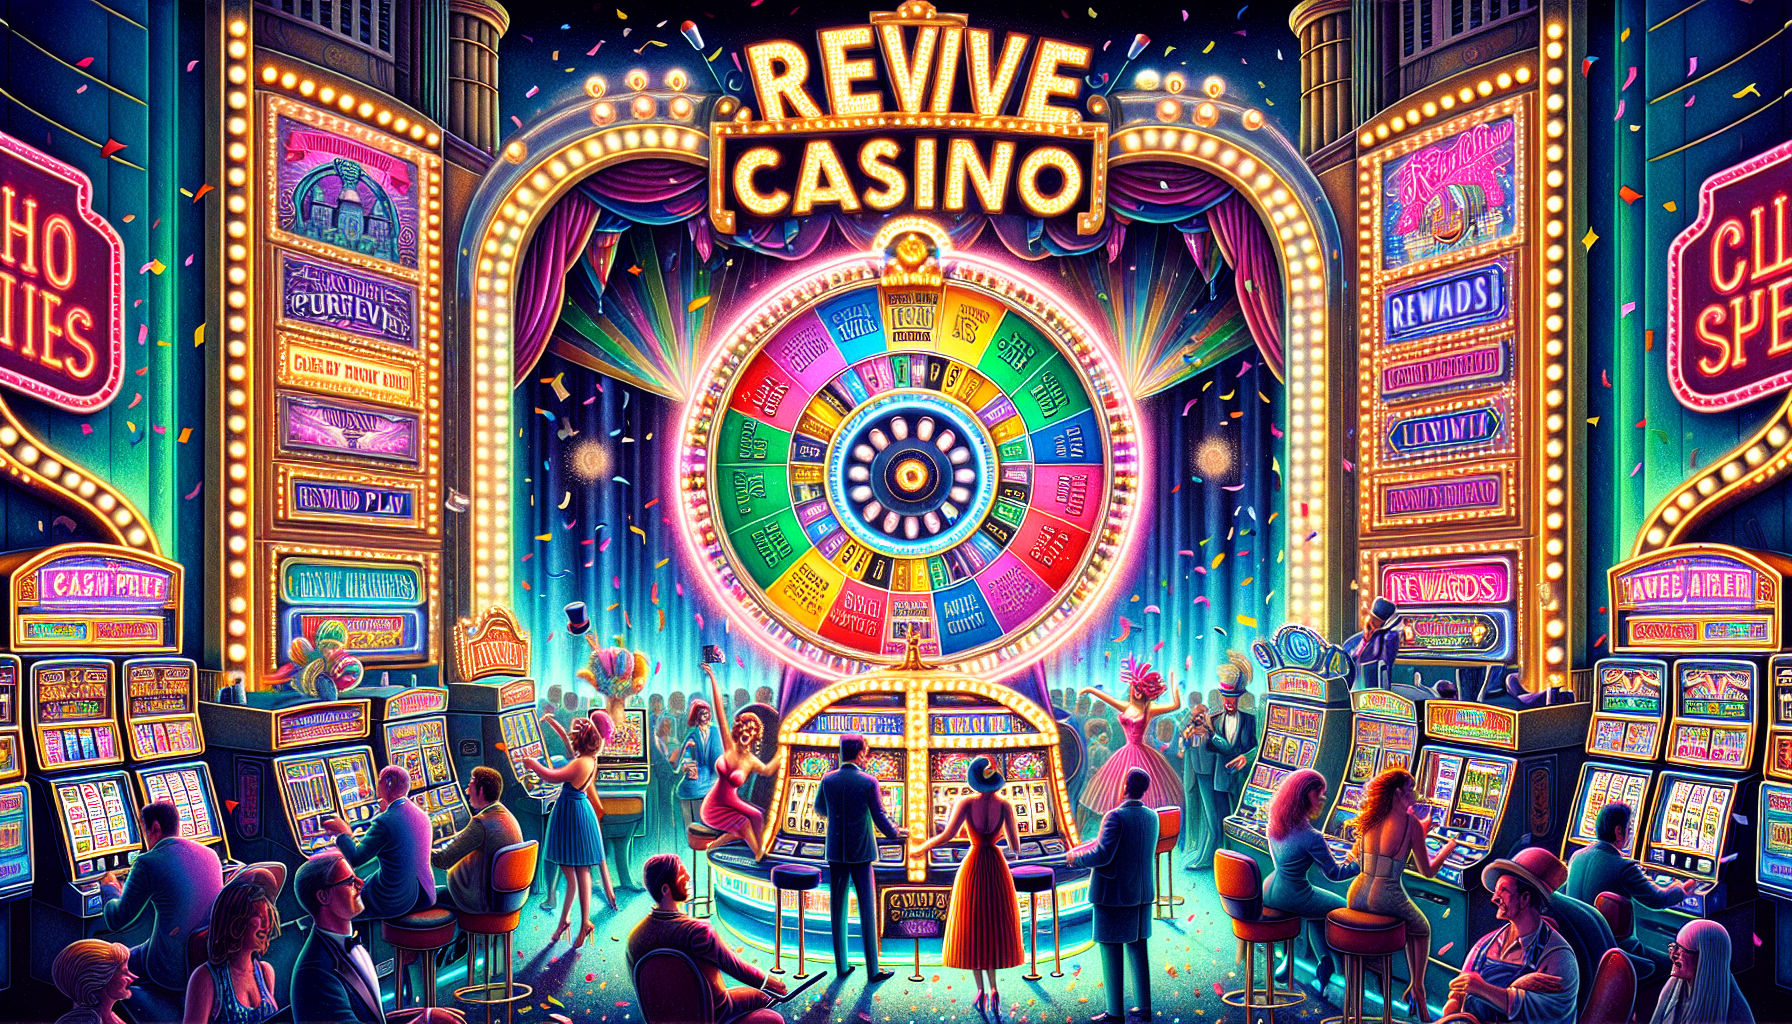 Whimsical illustration of casino promotions with exciting rewards and prizes